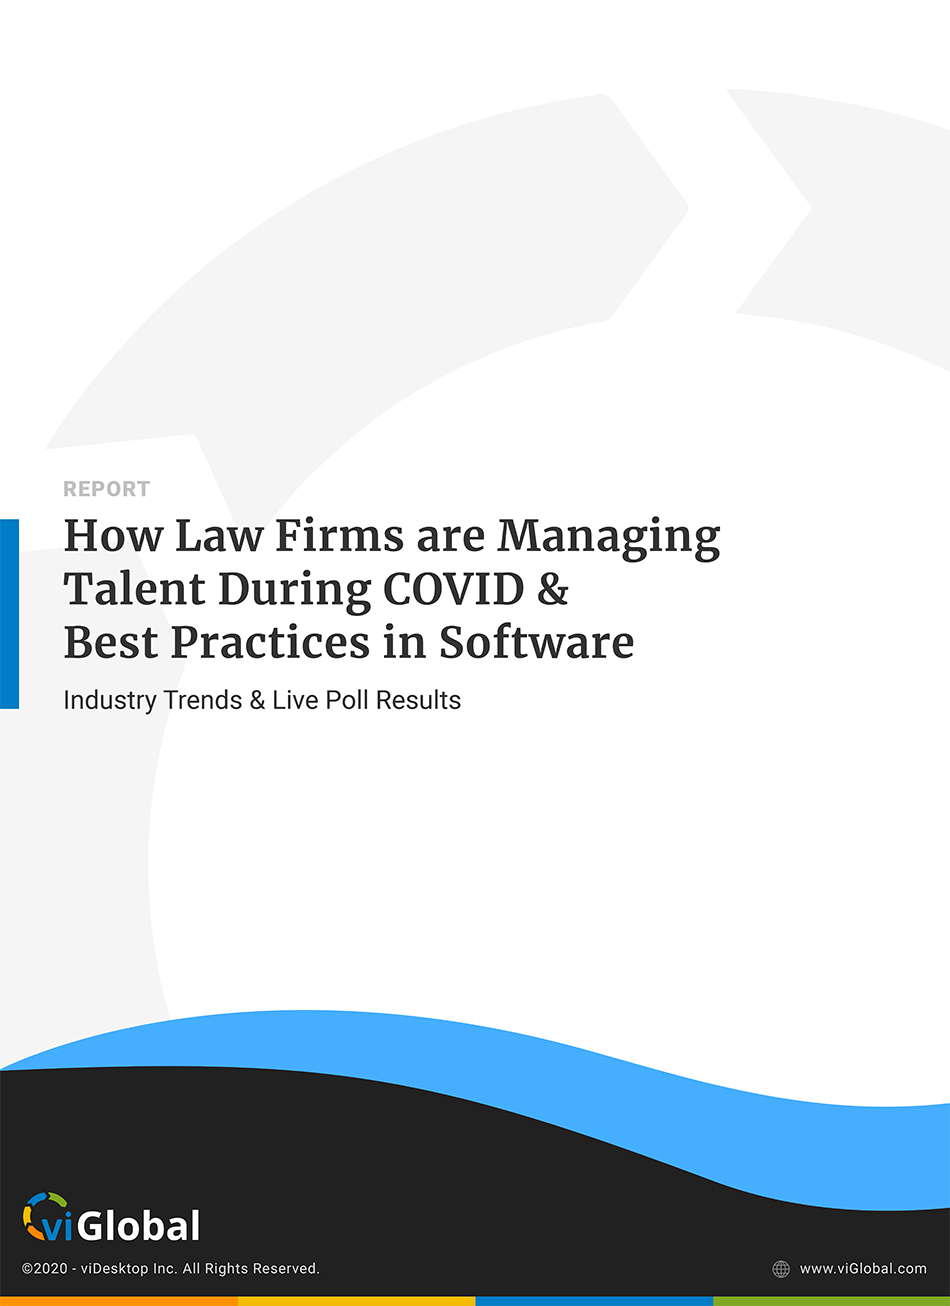 How Law Firms are Managing Talent During COVID & Best Practices in Software